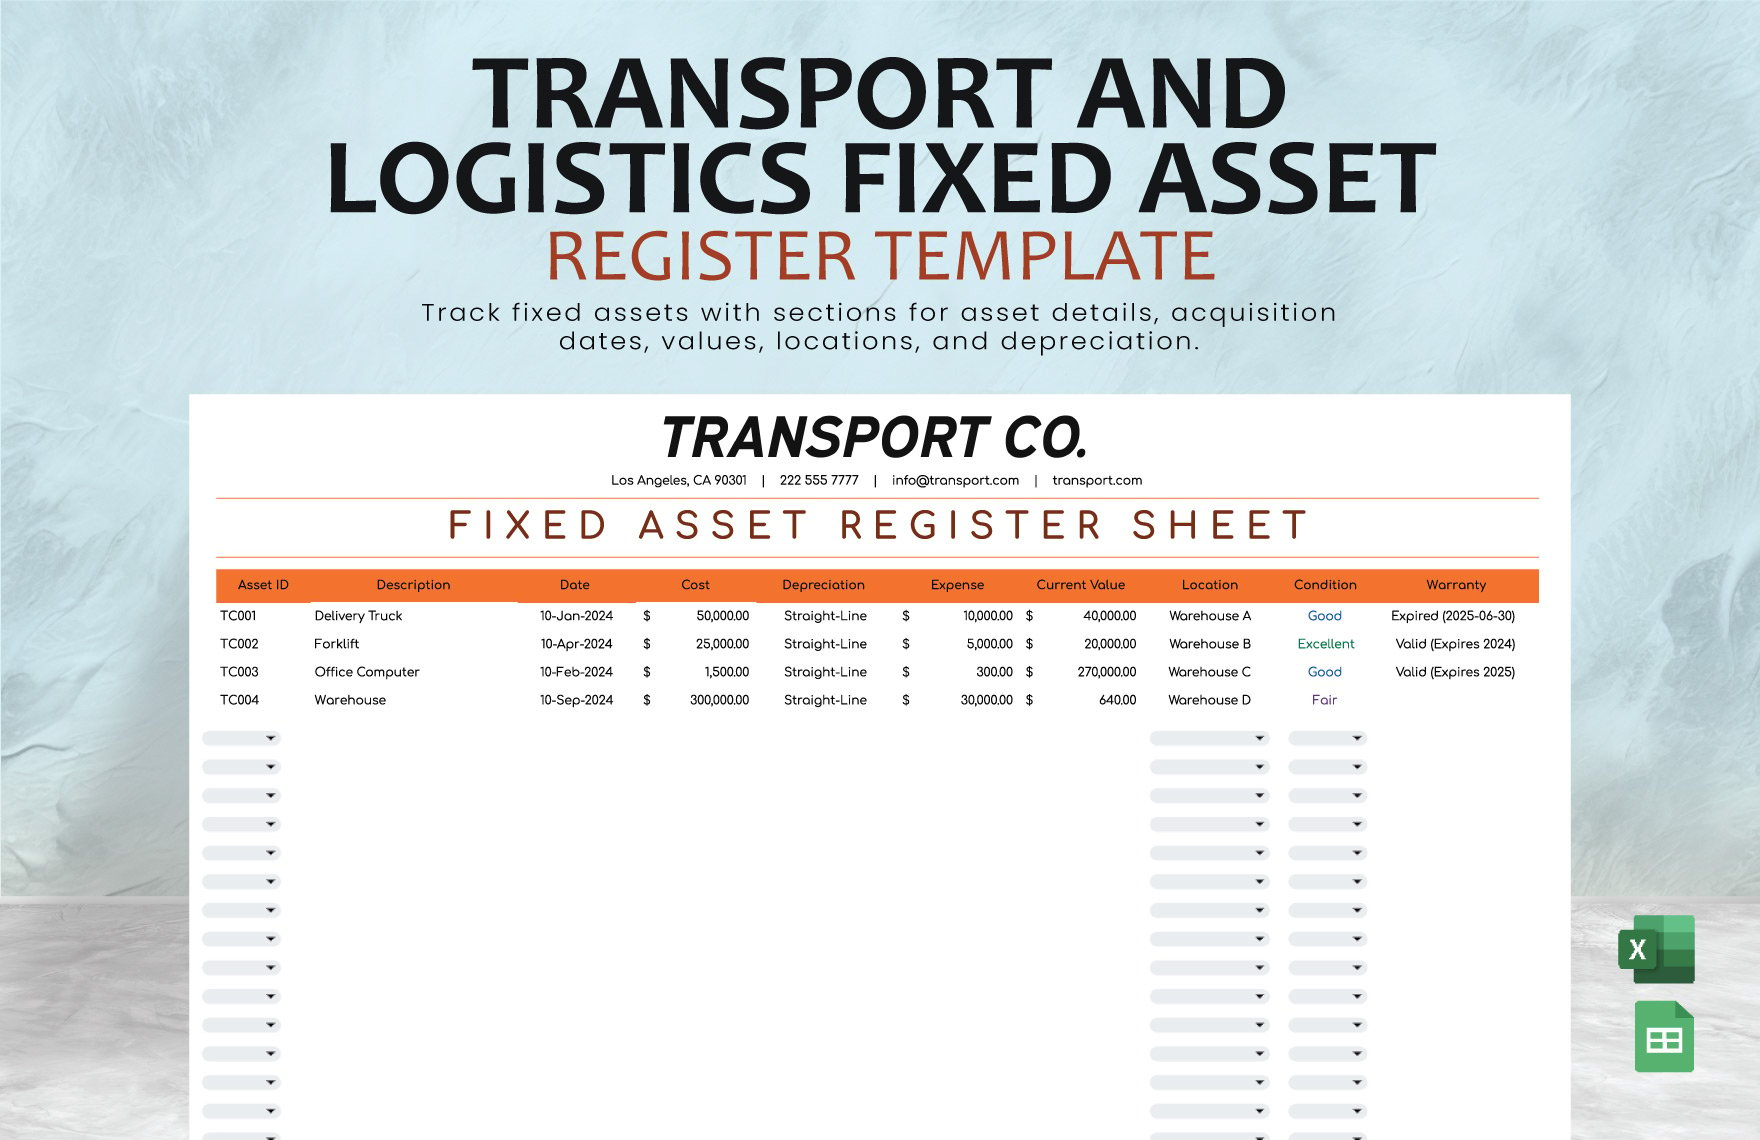 Free Transport and Logistics Fixed Asset Register Template in Excel, Google Sheets